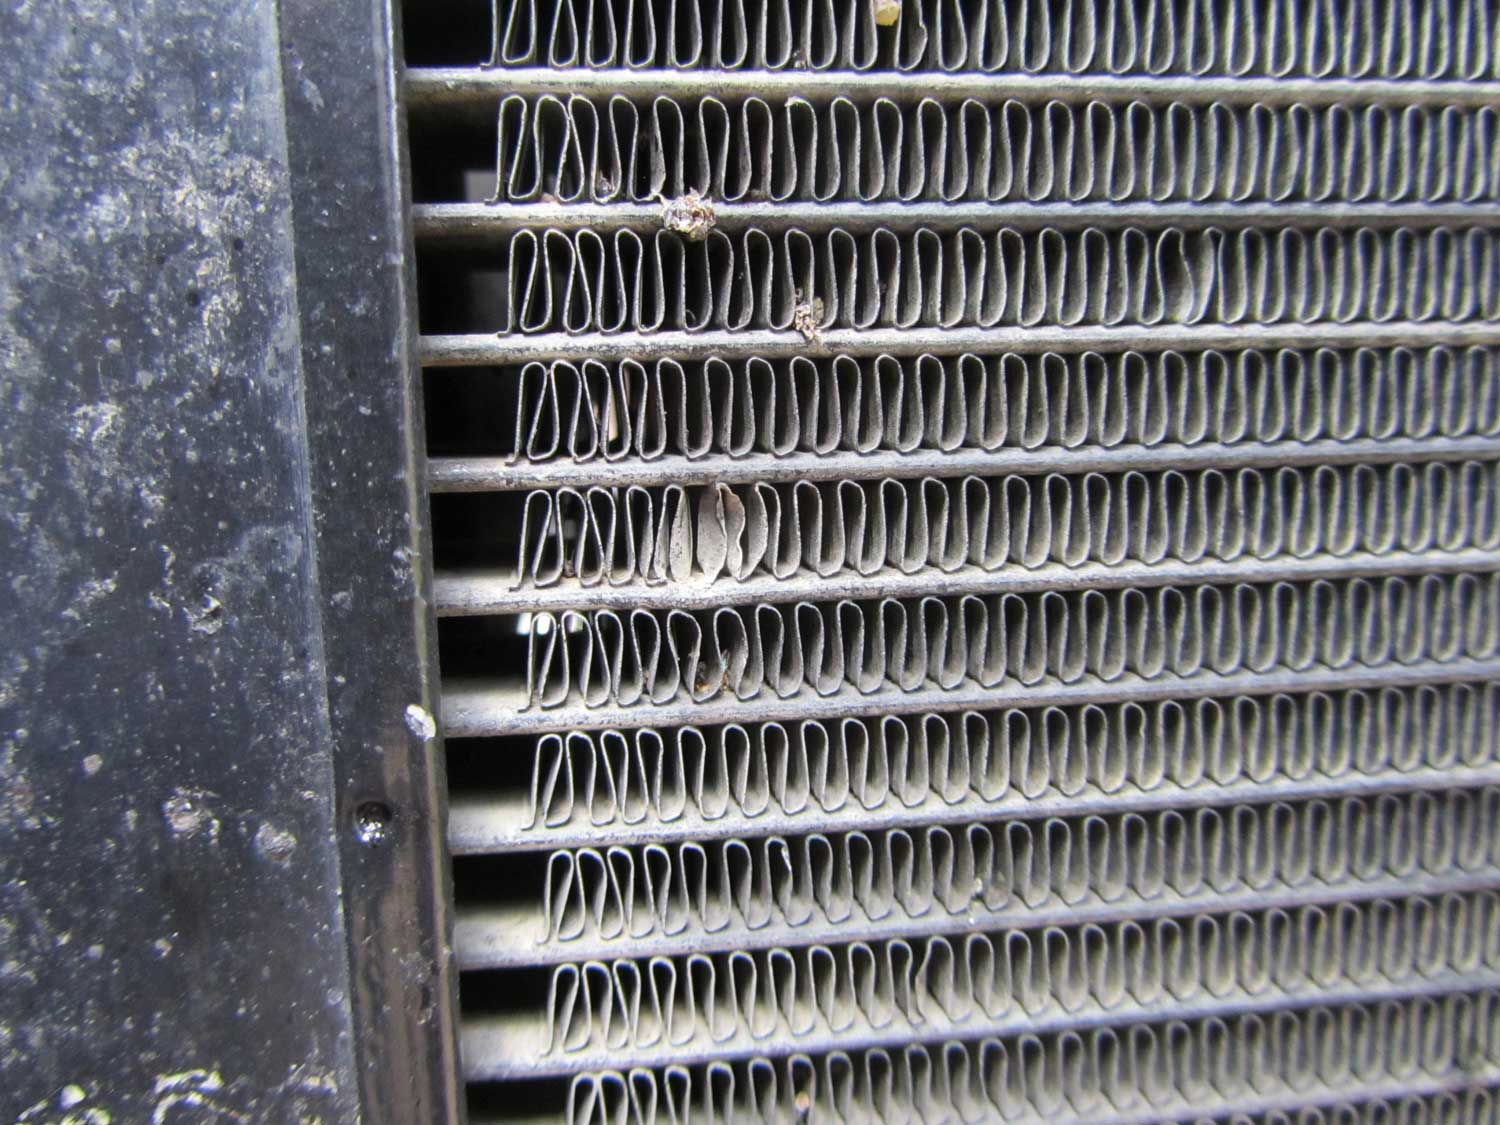 Damage that occurred before fitting the R&G radiator guard